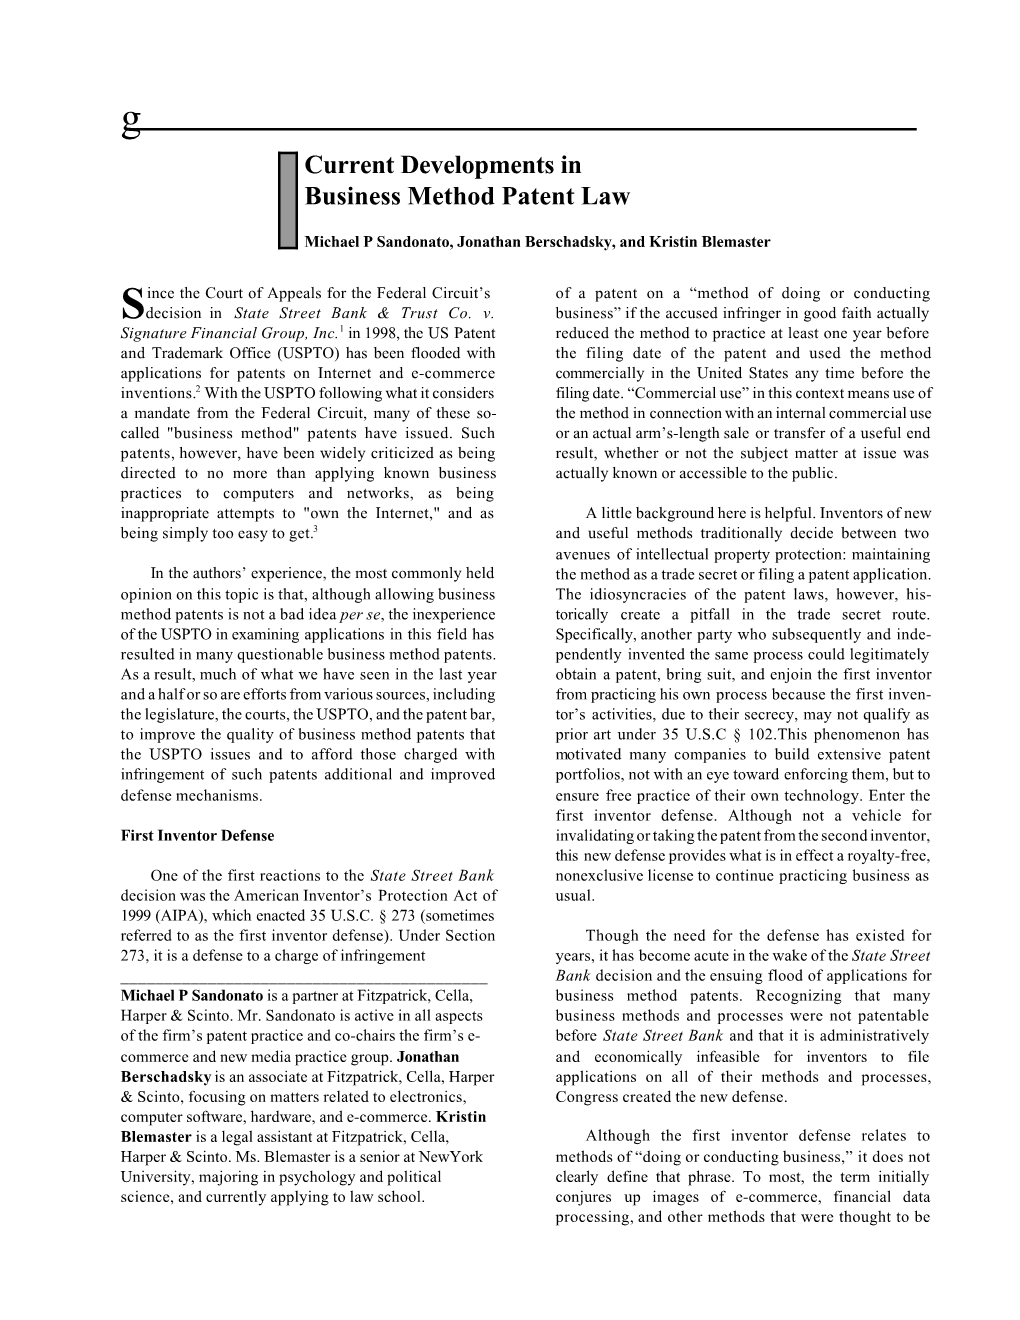 Current Developments in Business Method Patent Law